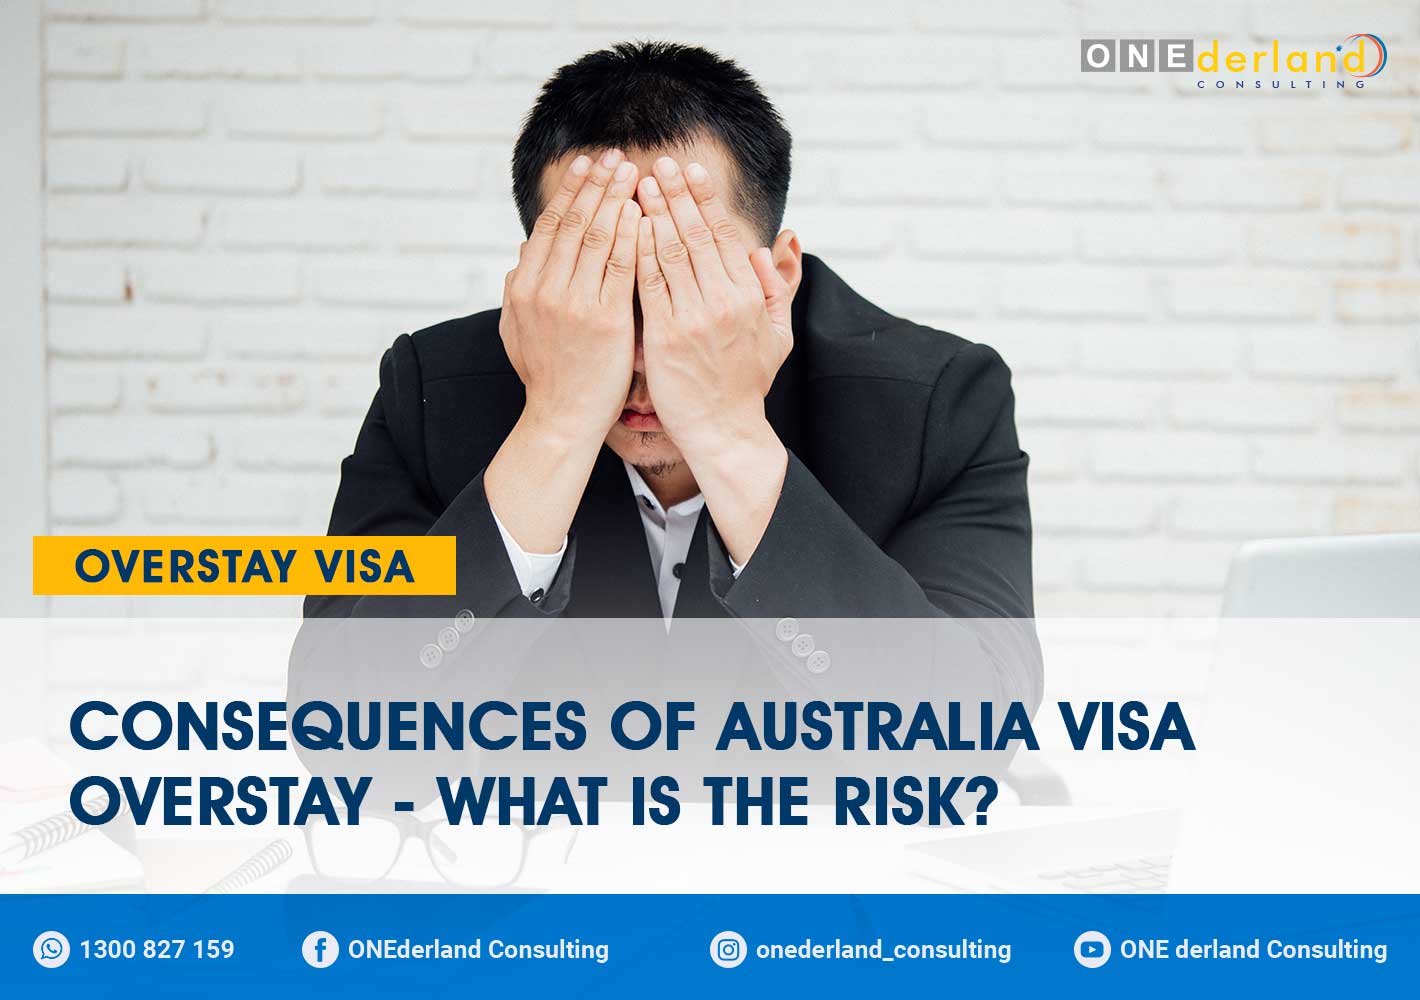 breaching visa conditions & overstay